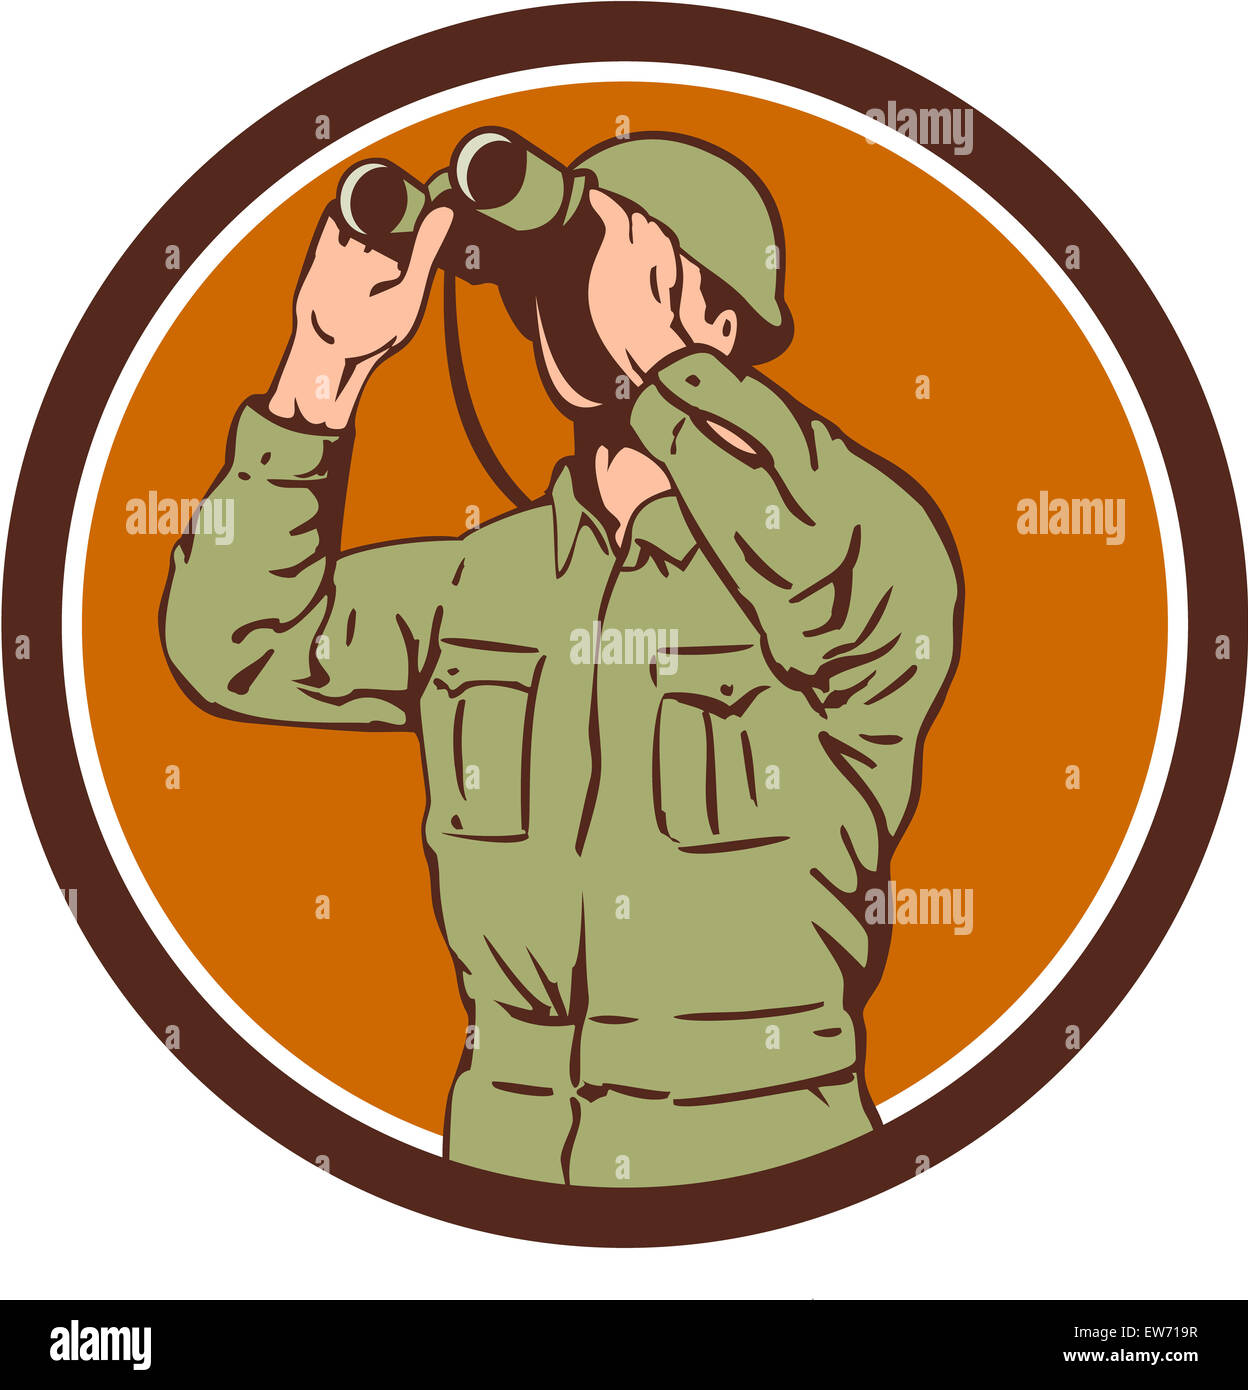 Illustration of a World War One American soldier serviceman looking through the binoculars set inside circle on isolated background done in retro style. Stock Photo